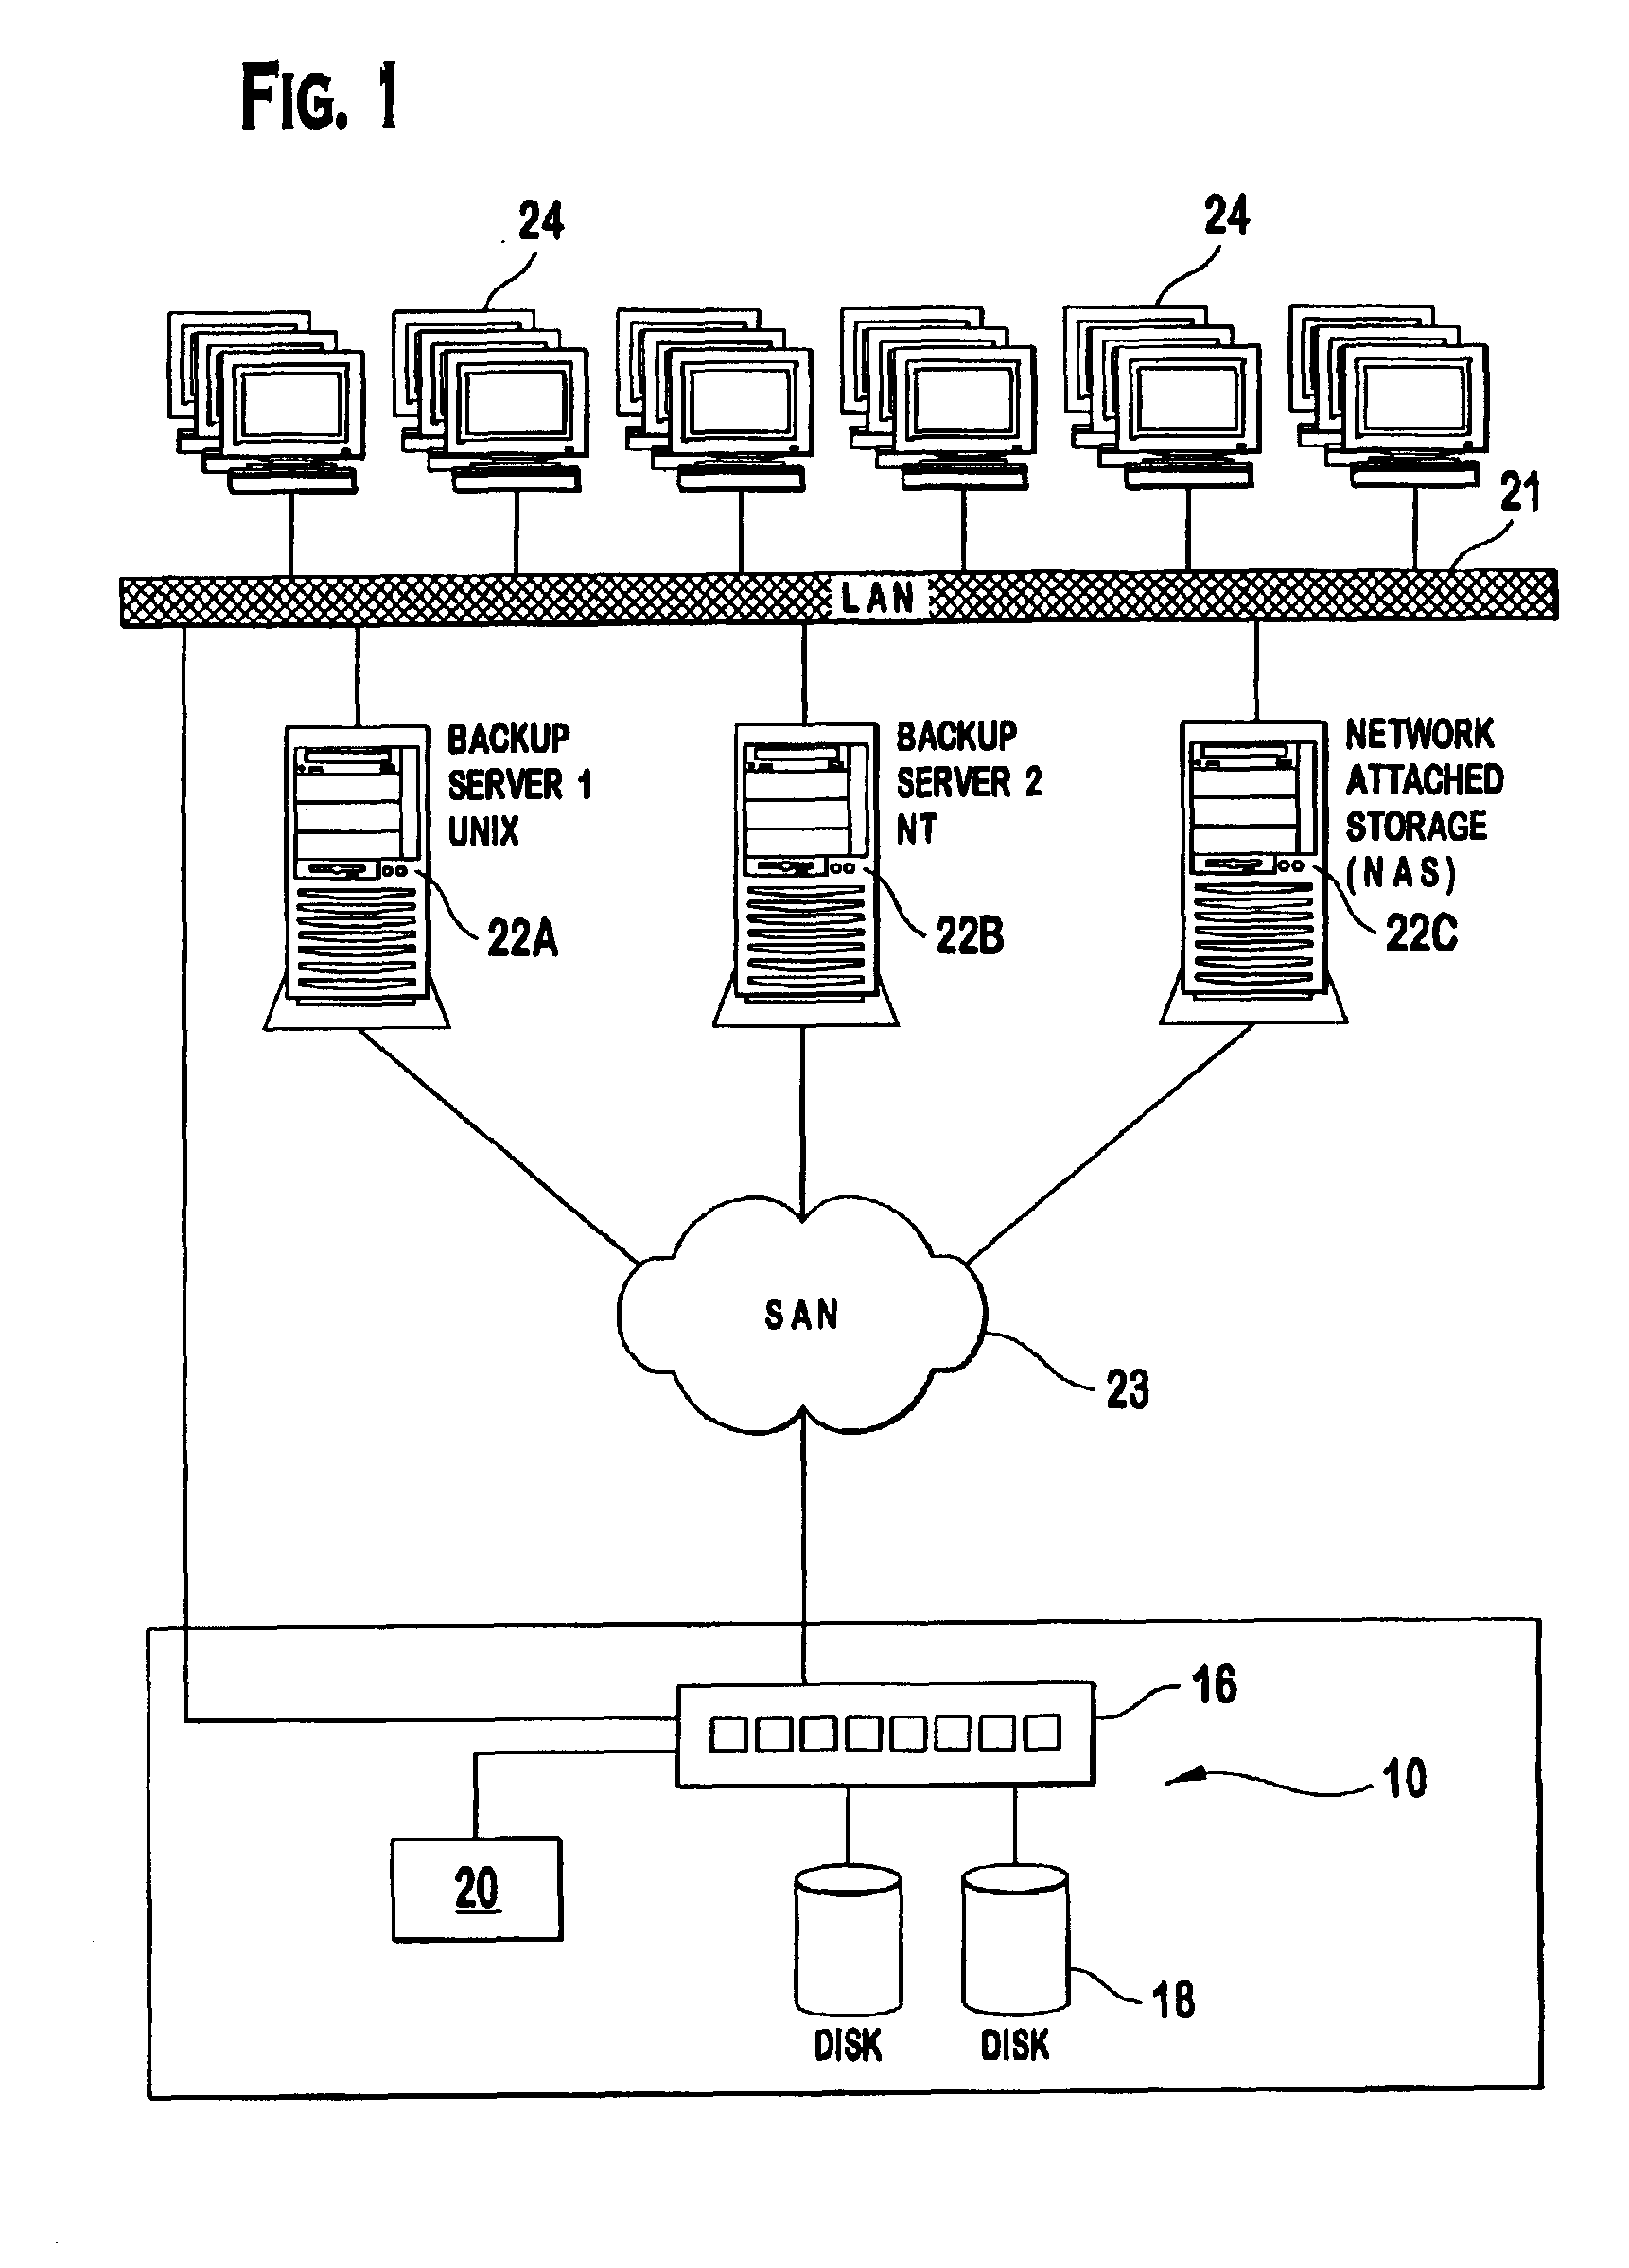 System and method for exporting a virtual tape